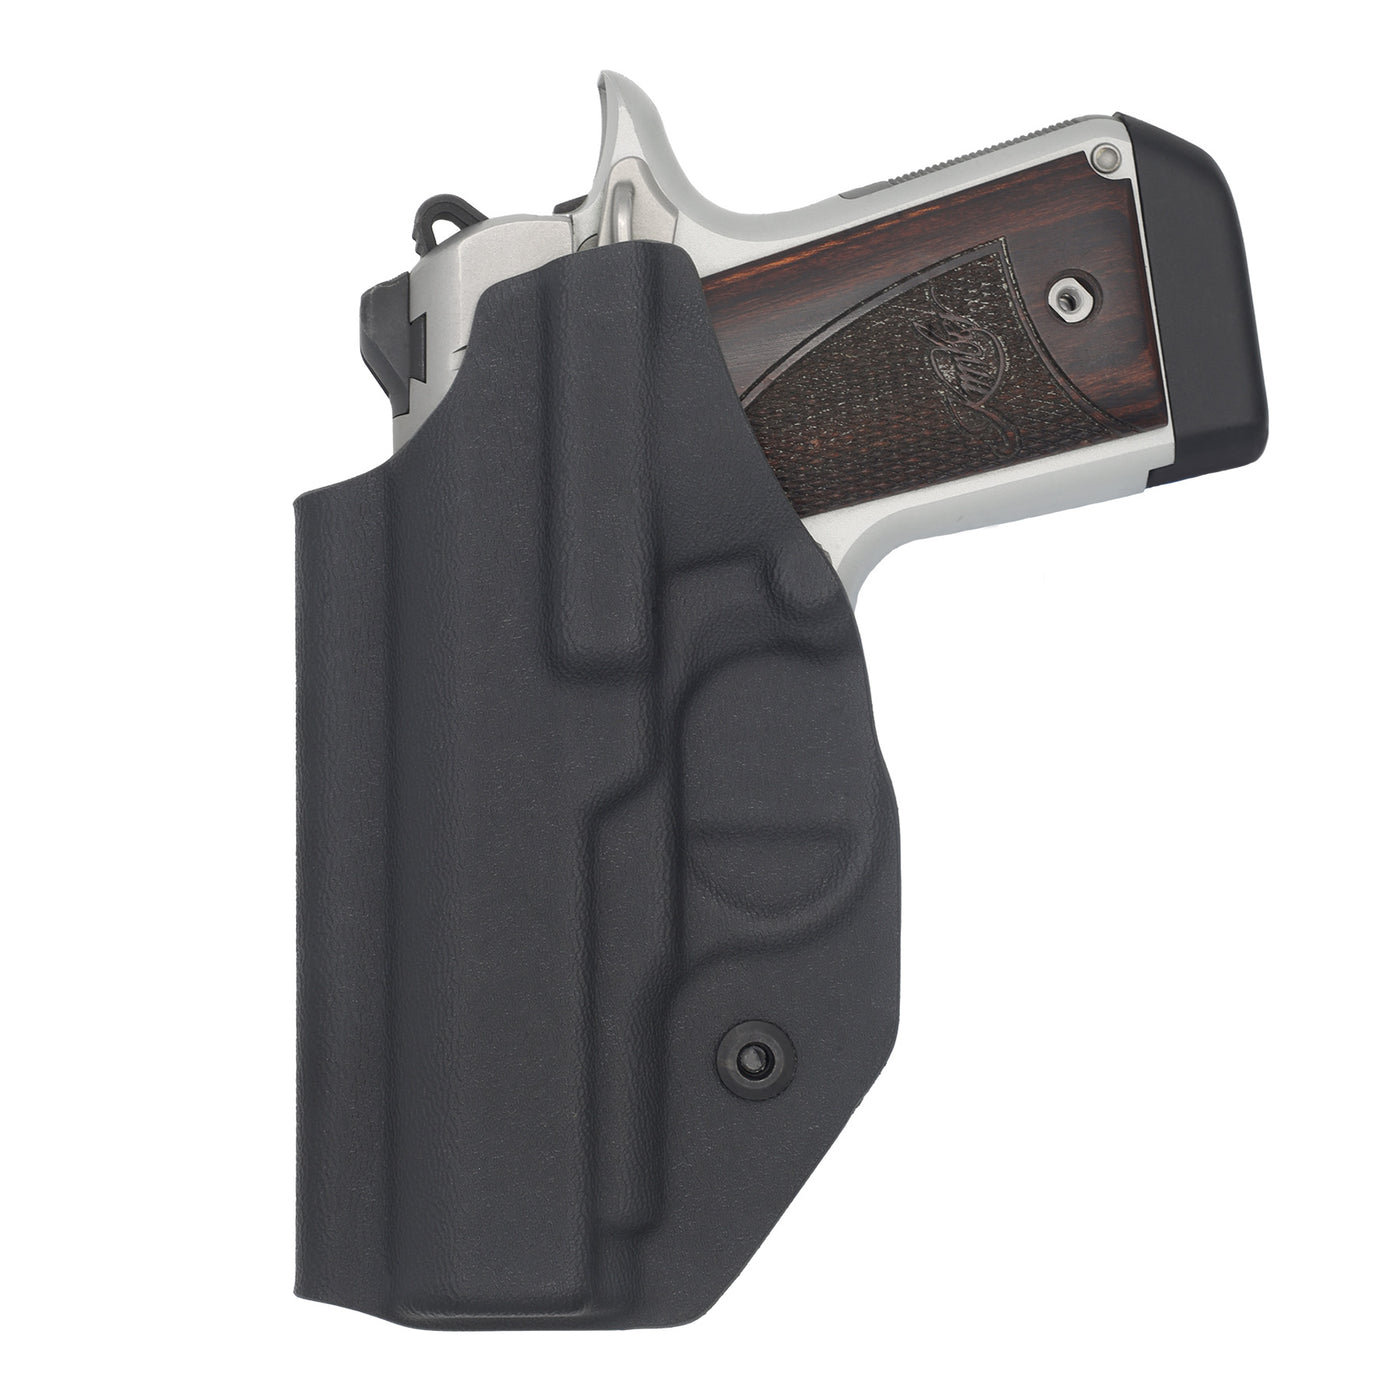 C&G Holsters Covert IWB inside the waistband Kydex holster for Kimber Micro 9 rear view